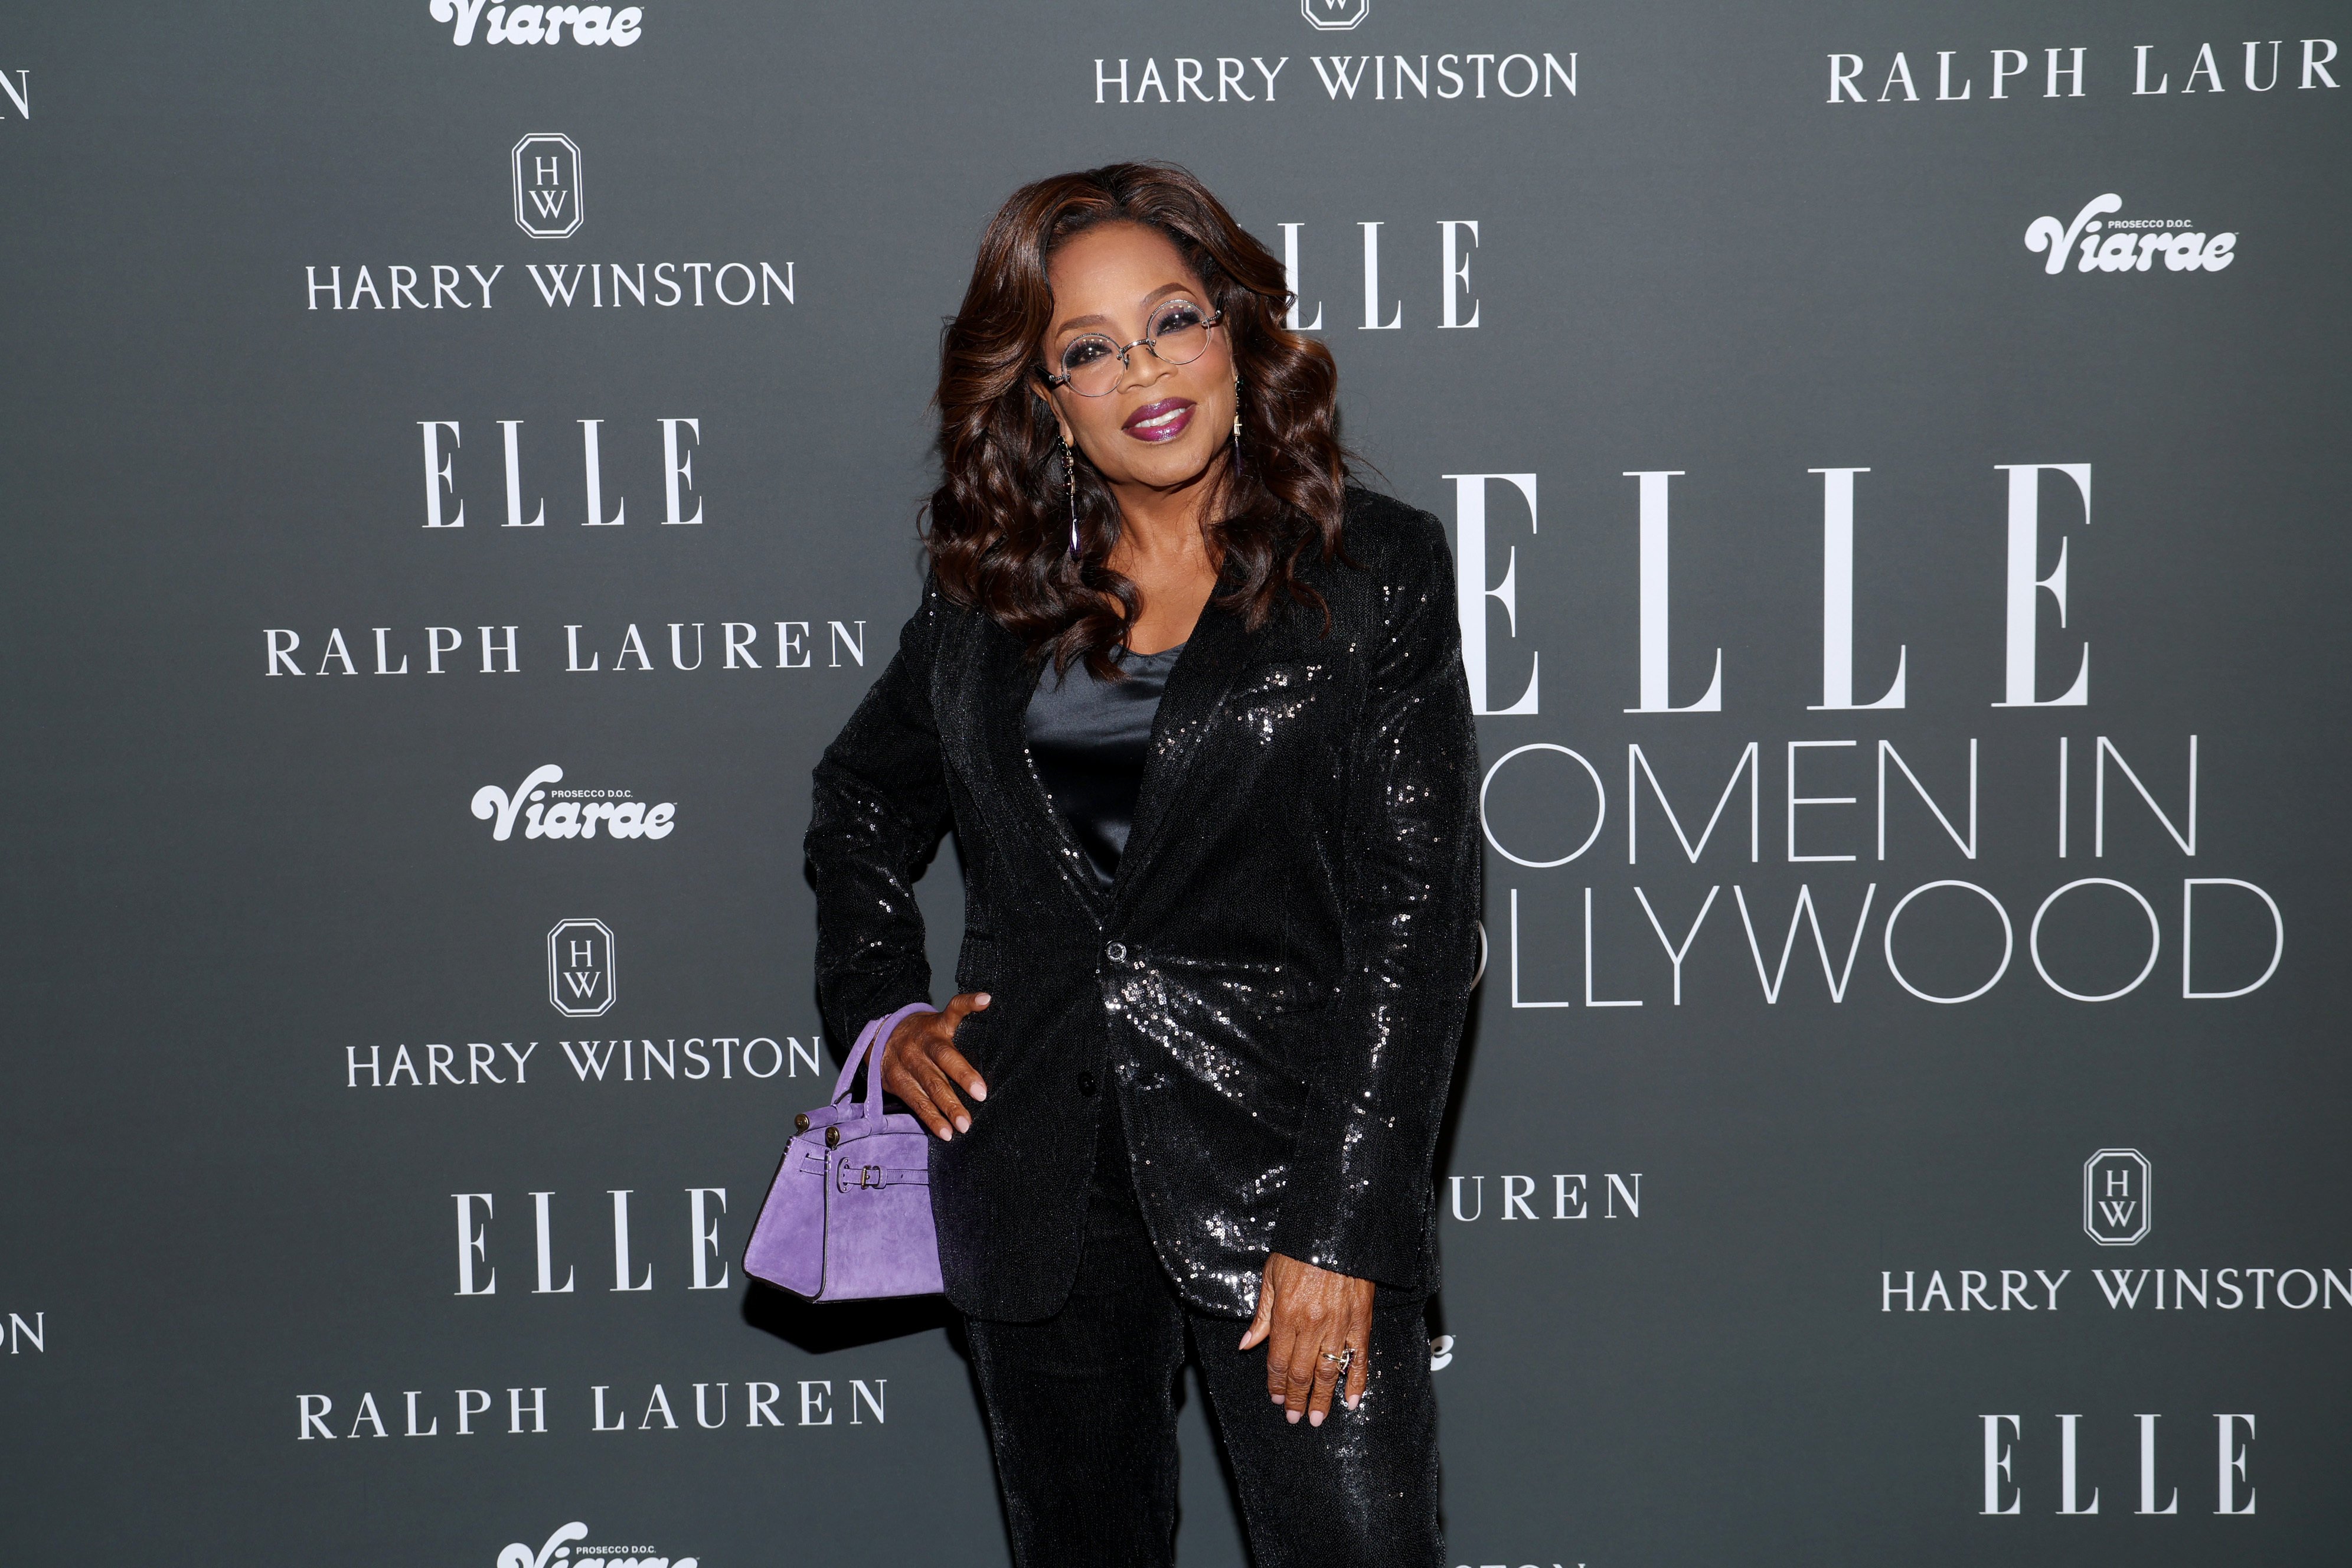 Oprah Winfrey – who turns 70 on January 29 – pictured in December at Elle’s 2023 Women in Hollywood celebration presented by Ralph Lauren, Harry Winston and Viarae, in Los Angeles, California, USA. Photo: Getty Images for Elle